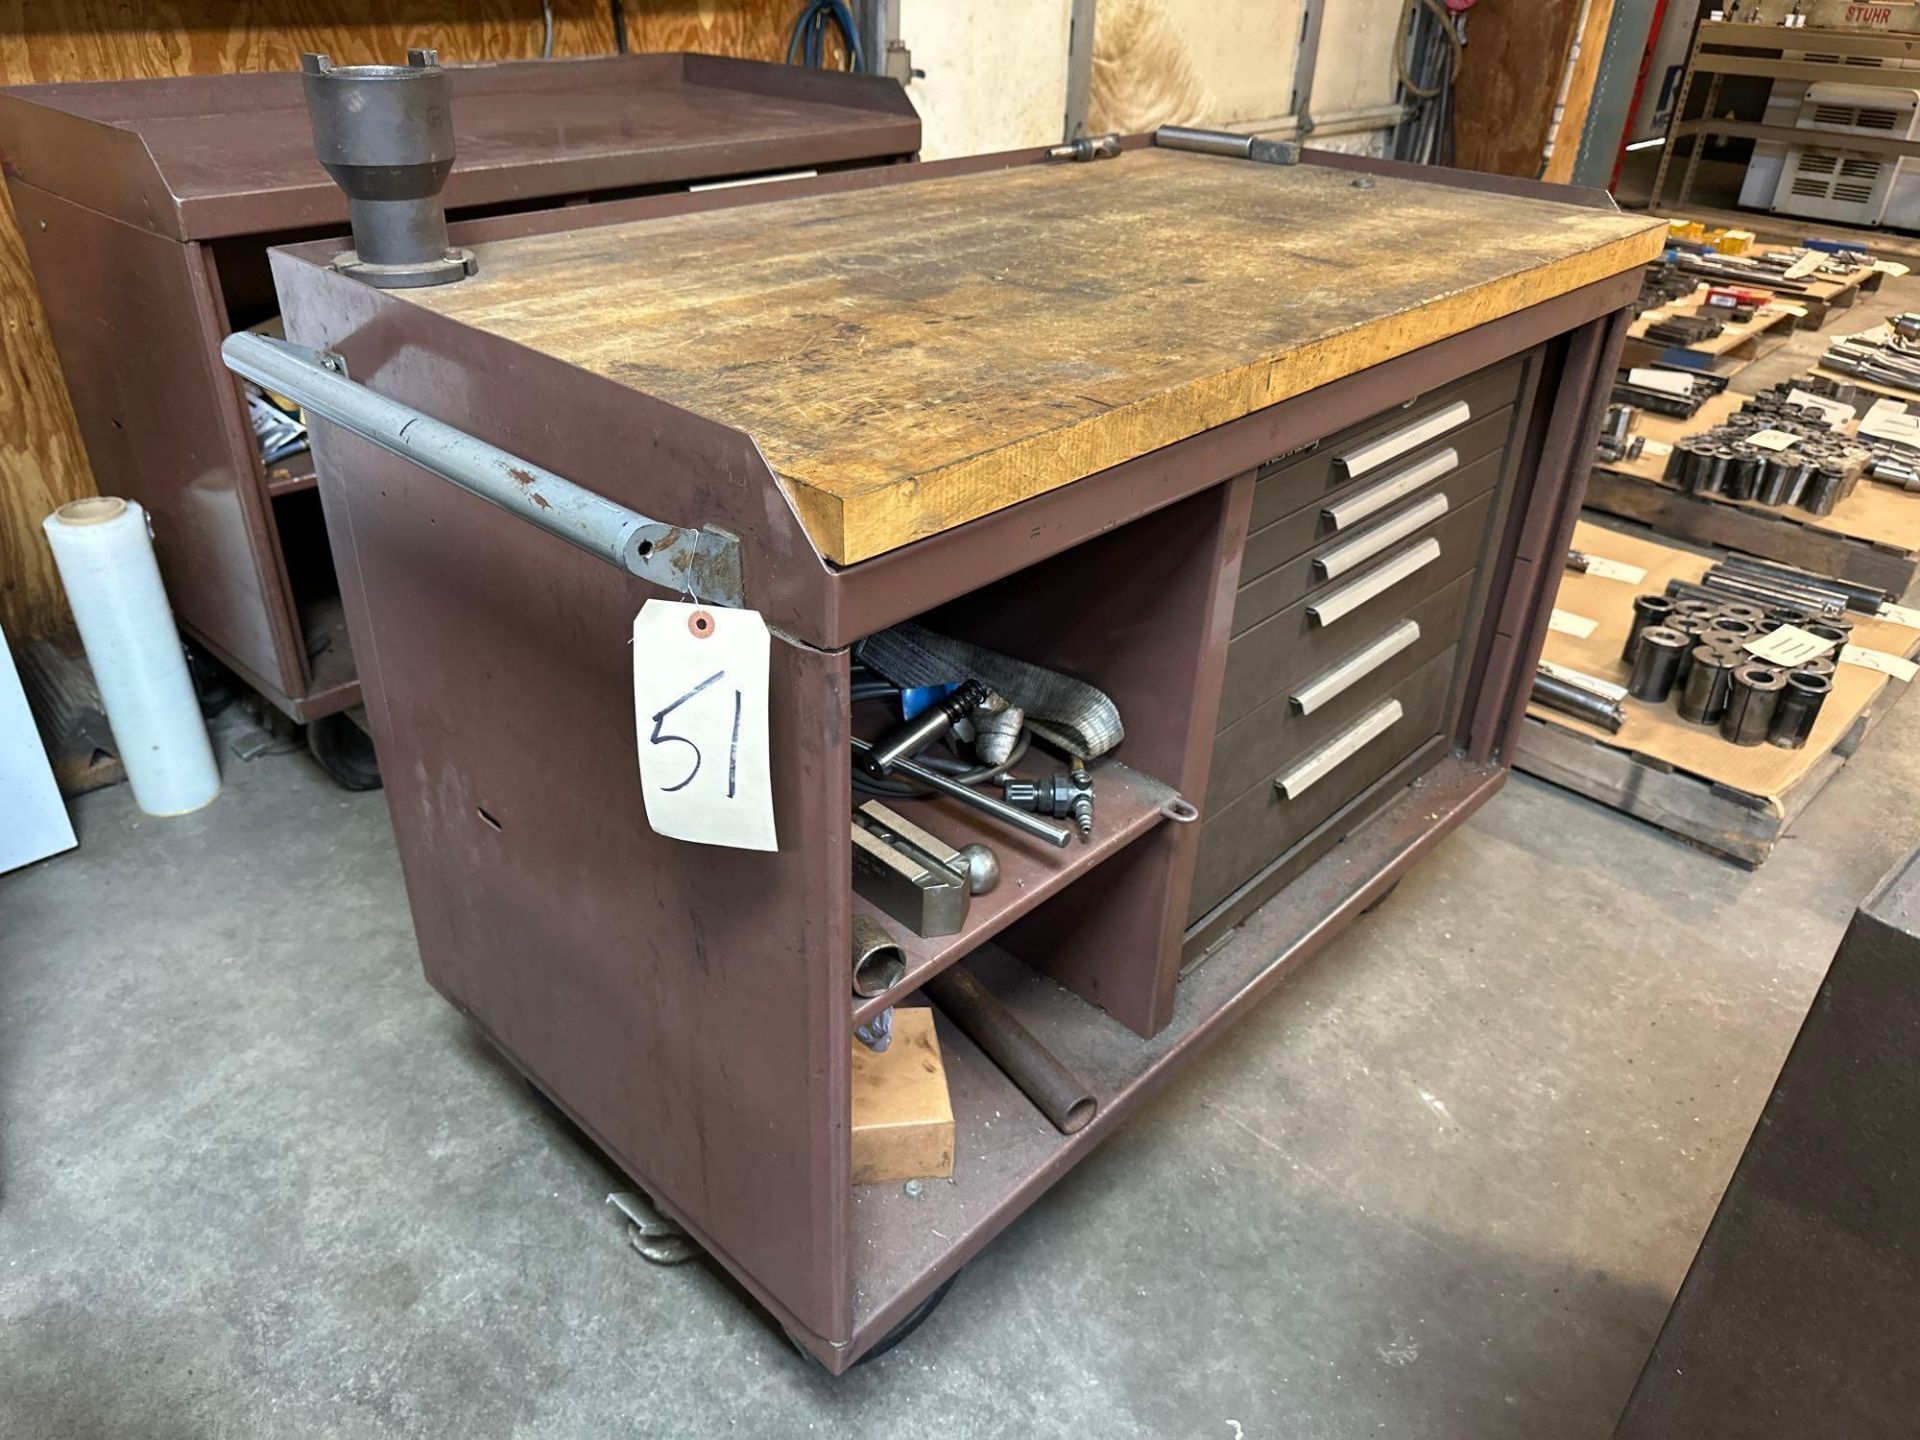 48” X 27” X 38” Tool Cart with Kennedy Tool Box, Set Up Tooling, and Misc.